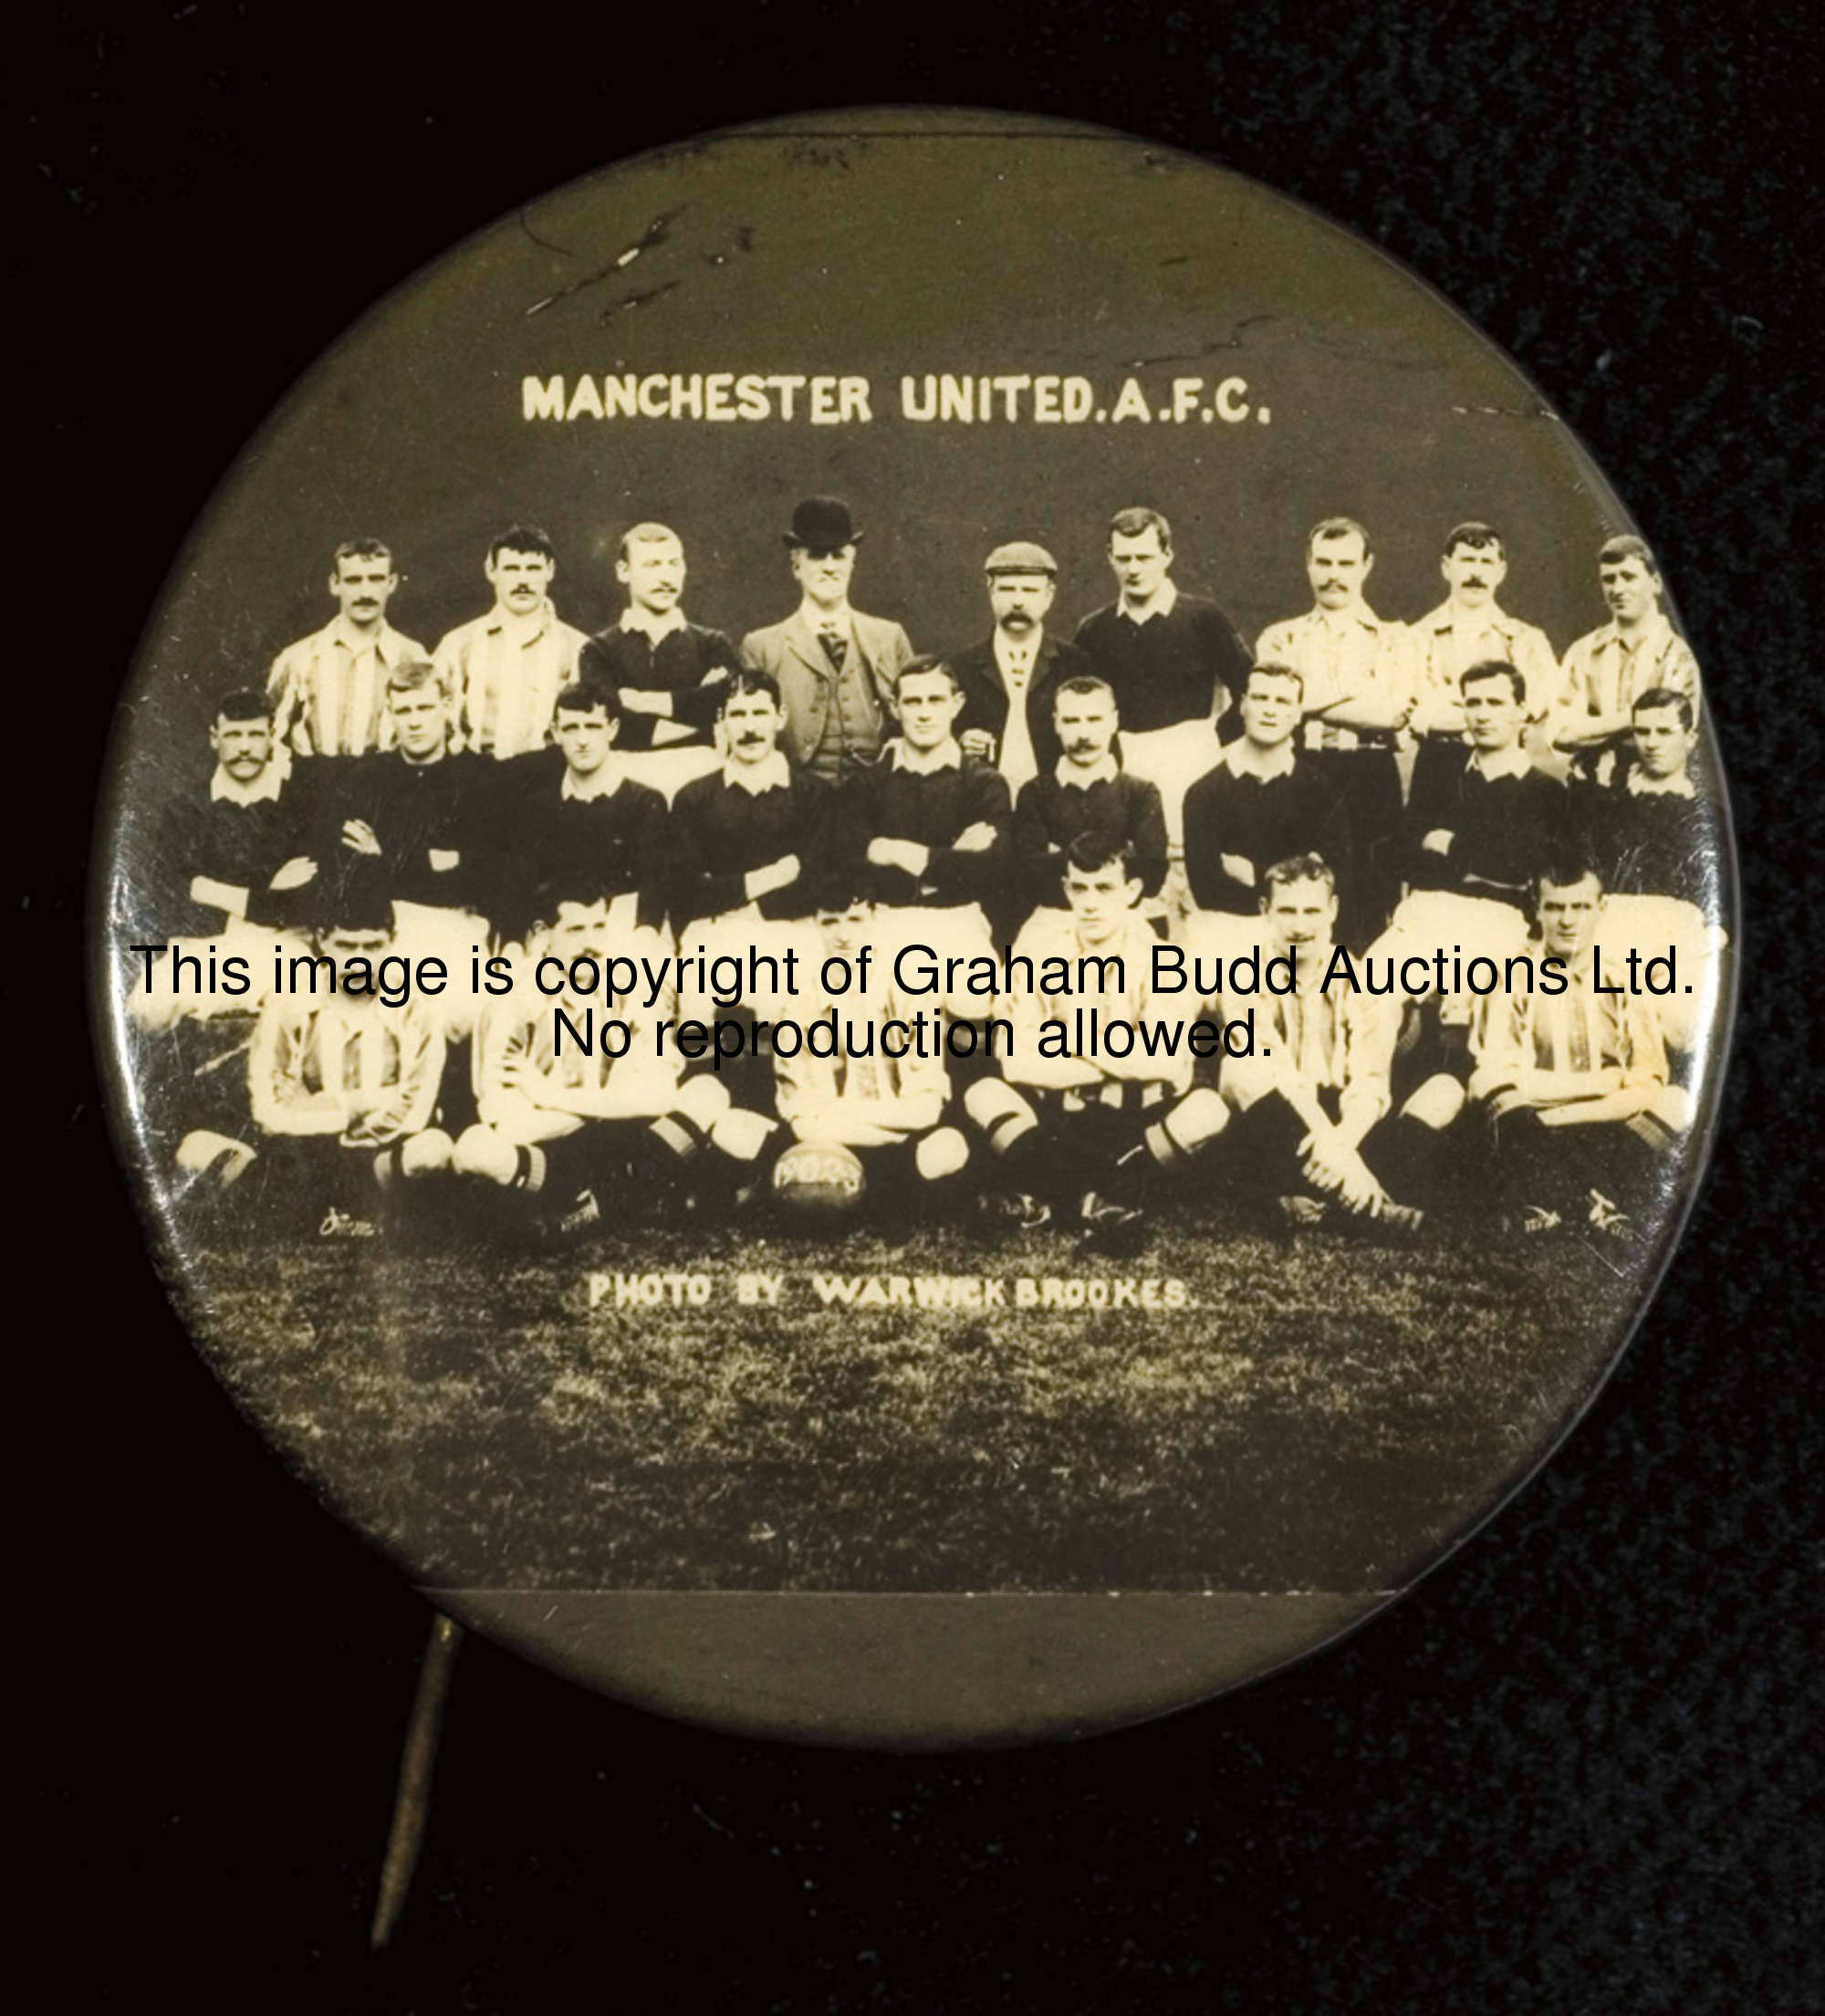 A rare and early Manchester United pin badge with a photographic team-group portrait of the 1902-03 ...